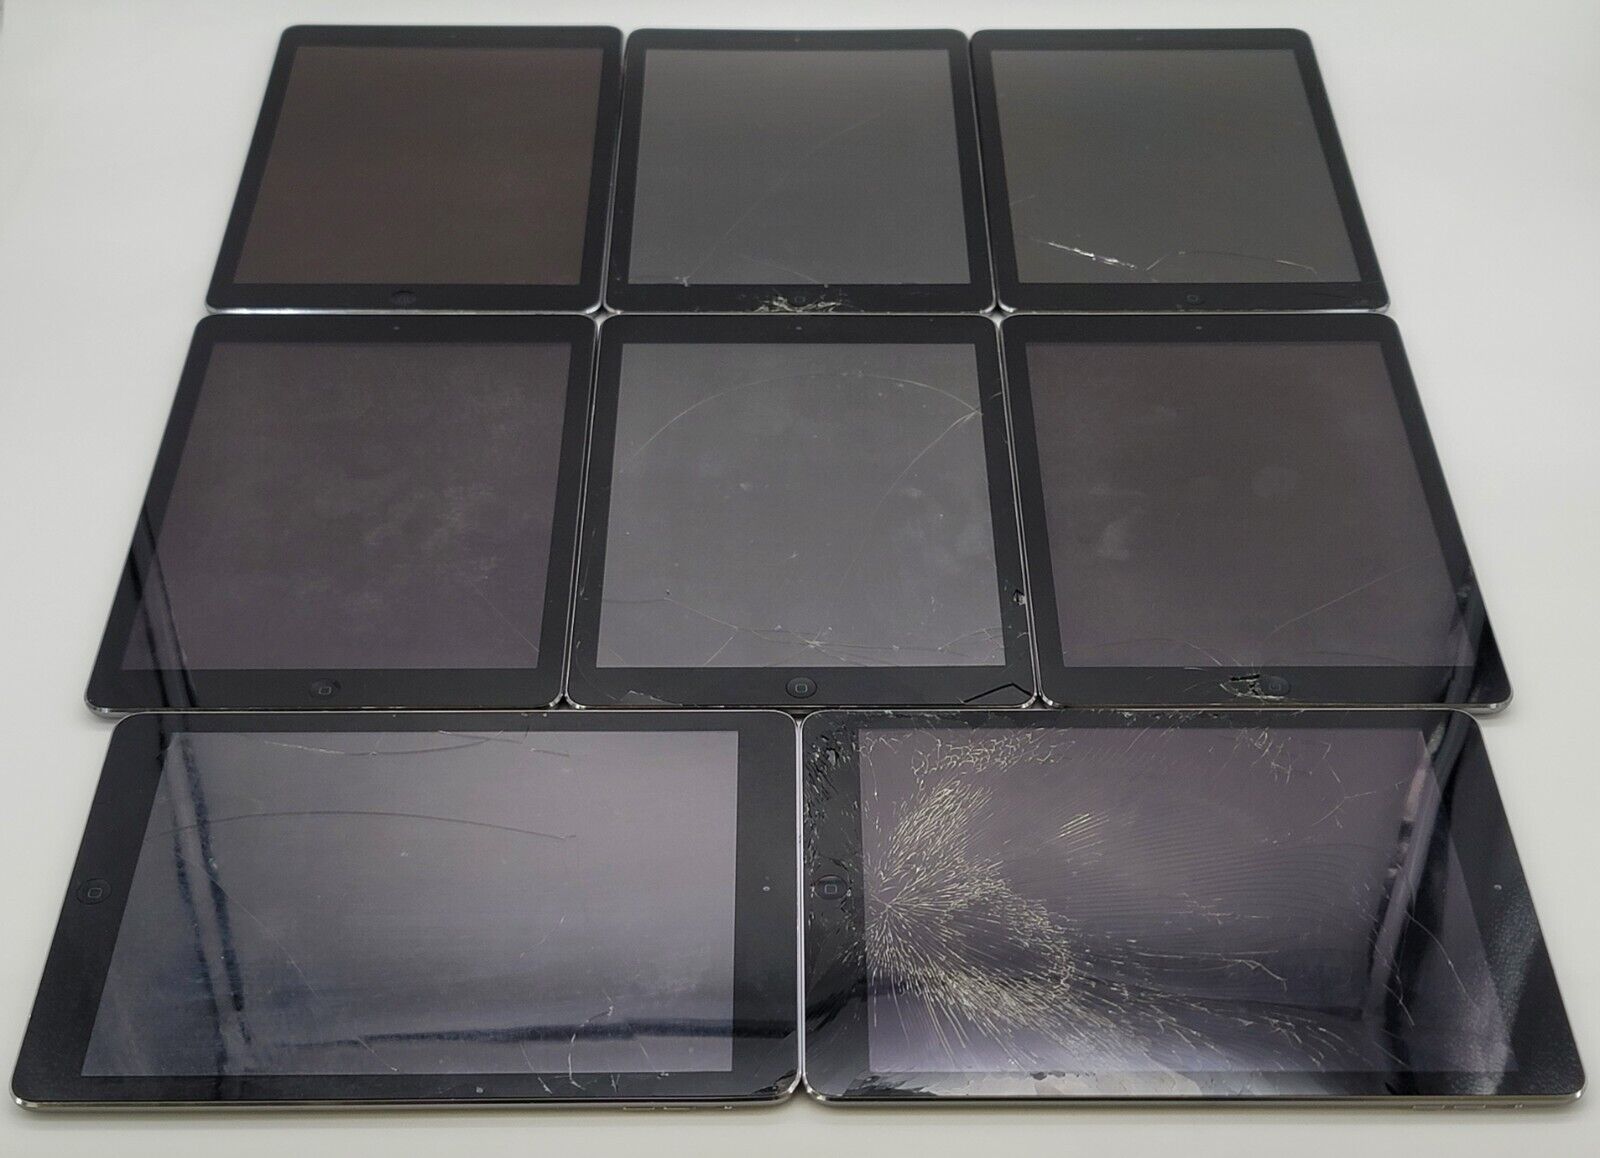 LOT OF 8 - Apple iPad Air 1 - CRACKED GLASS - 2013 | 16GB | Space Gray | A1474 Apple MD785LL/A